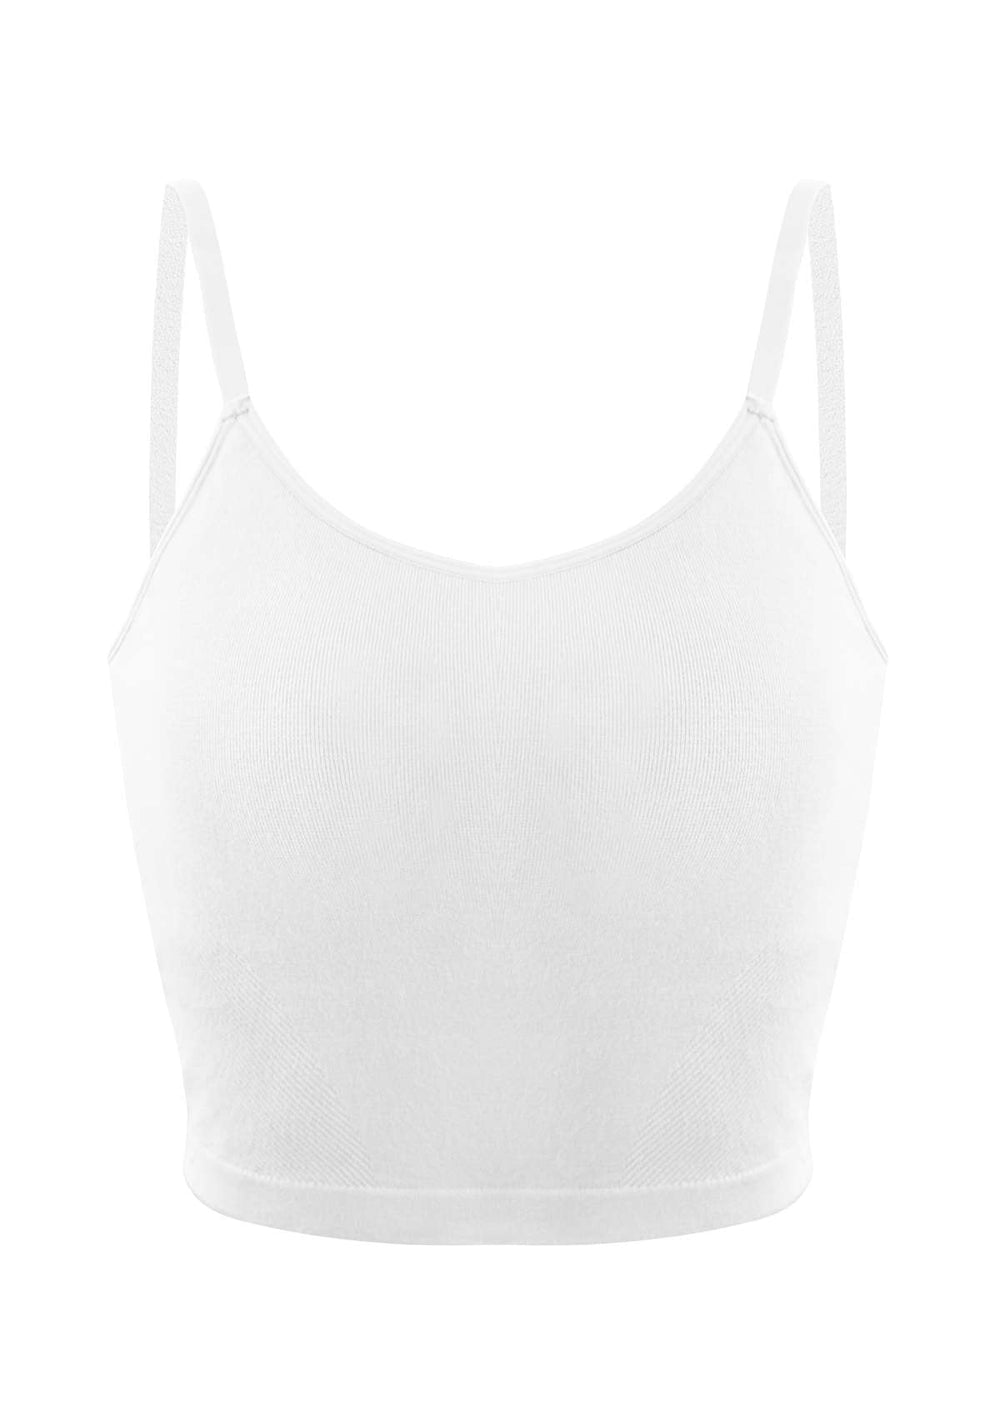 SONGFUL Love Cloud Yoga Tank Top with Built-In Bra for Petite